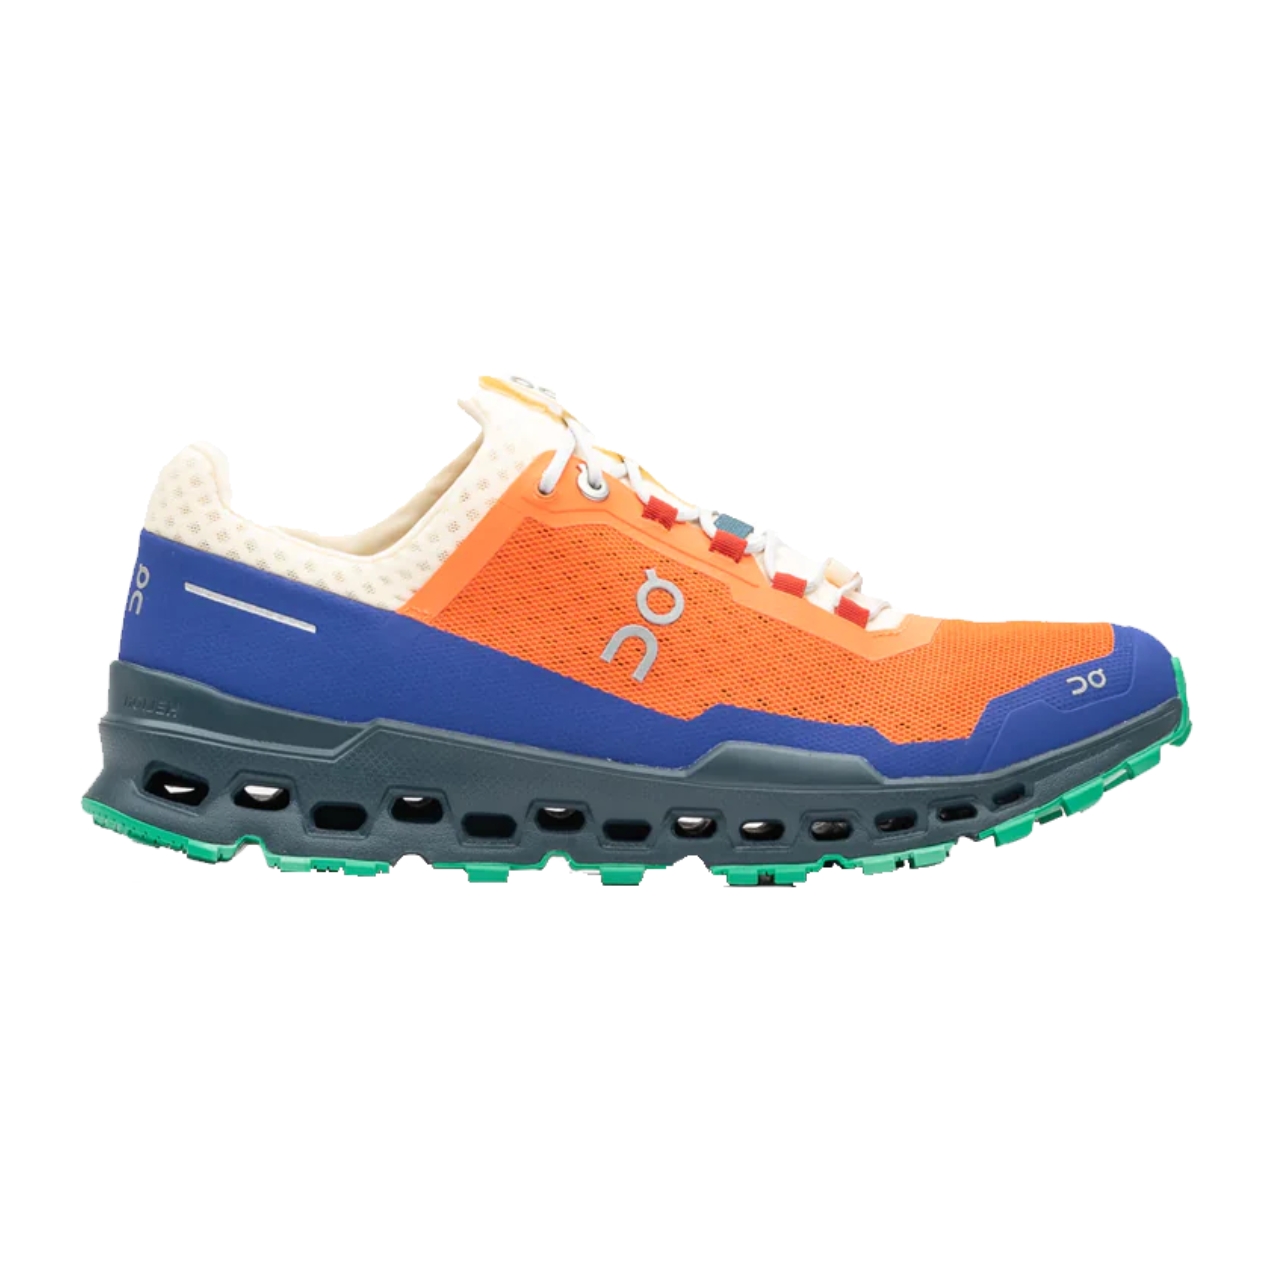 Non-grip Cloudultra Flame mens sneakers in orange and blue